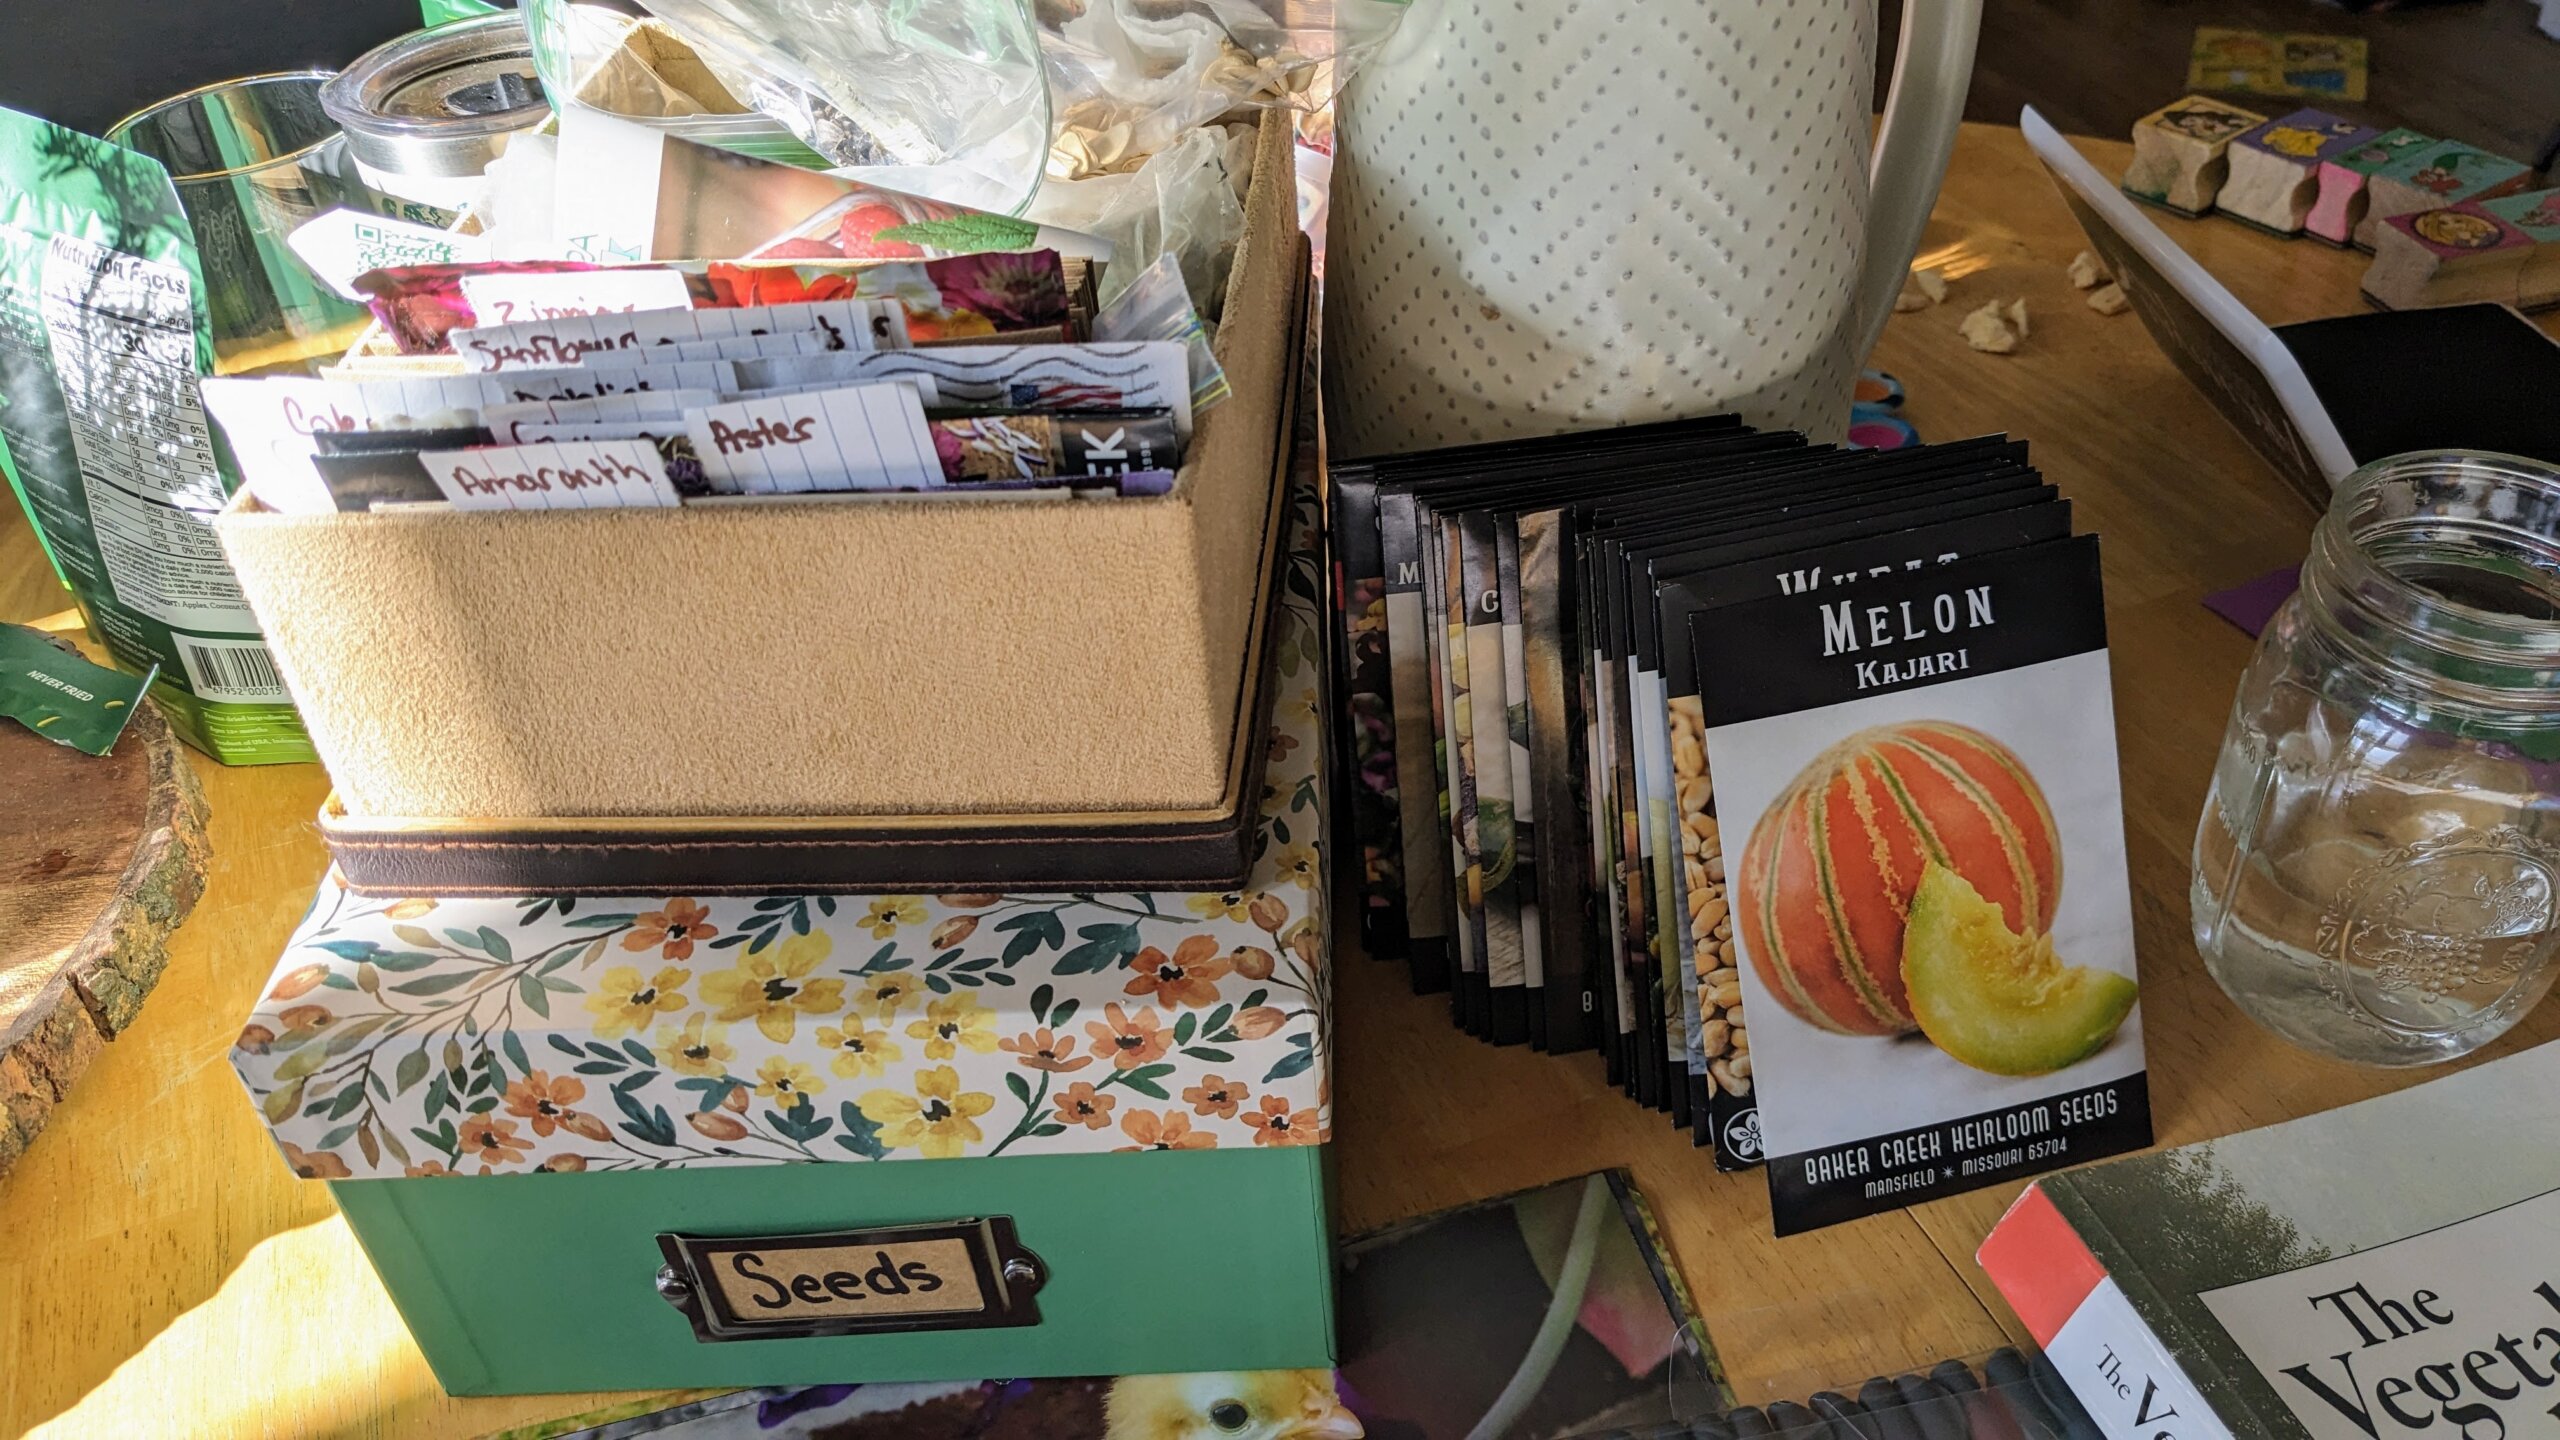 boxes of seeds next to a pile of seed packets